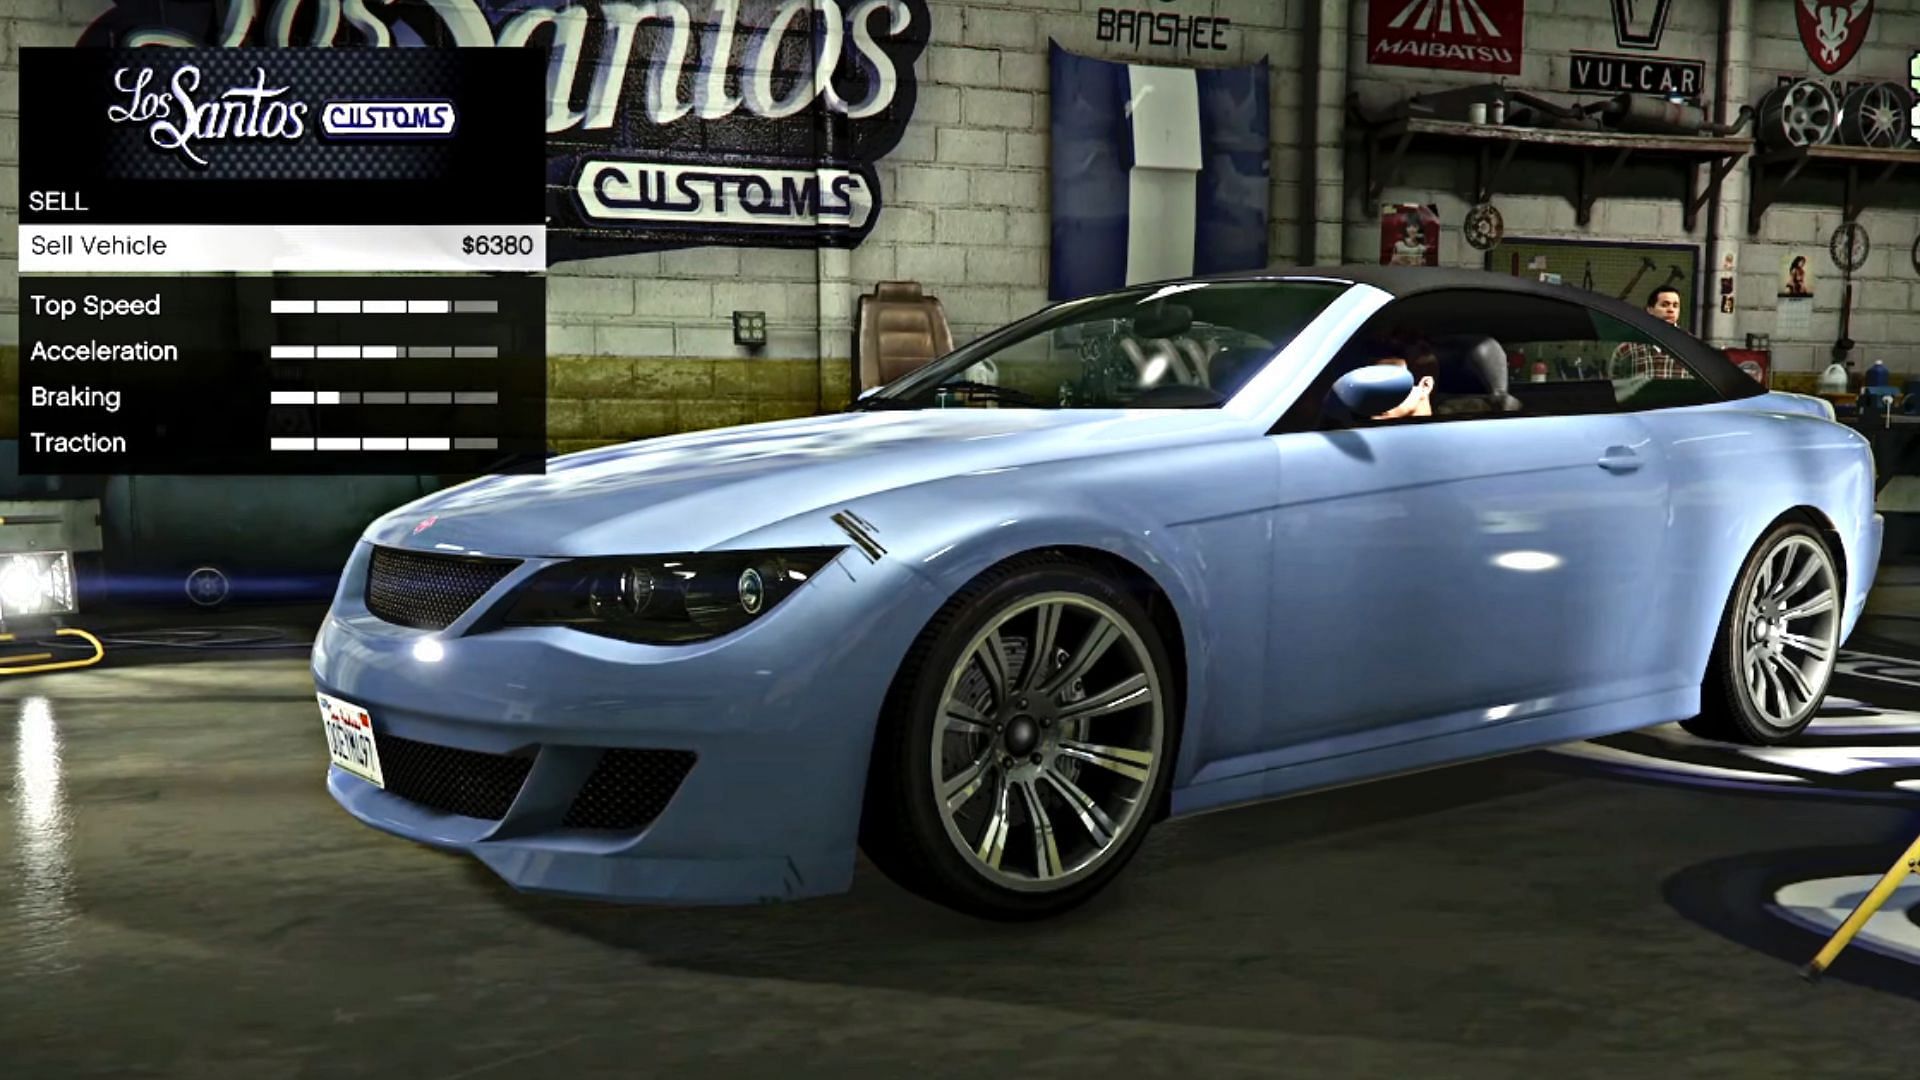 Cars can be sold in Los Santos Customs (Image via YouTube/GrubMagnet Gaming)